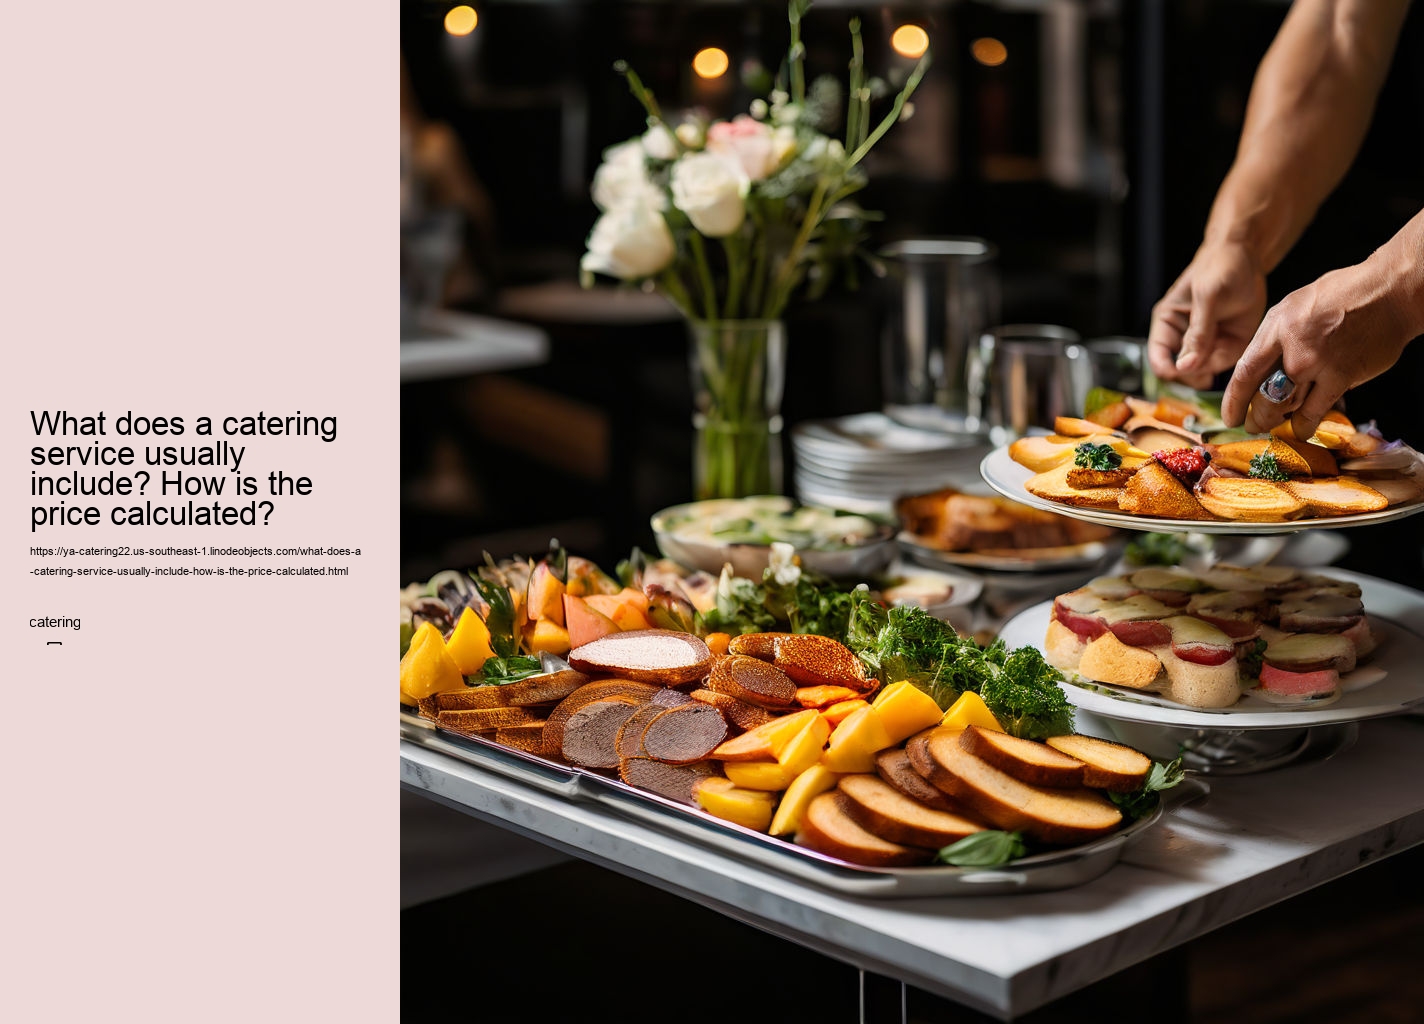 What does a catering service usually include? How is the price calculated?